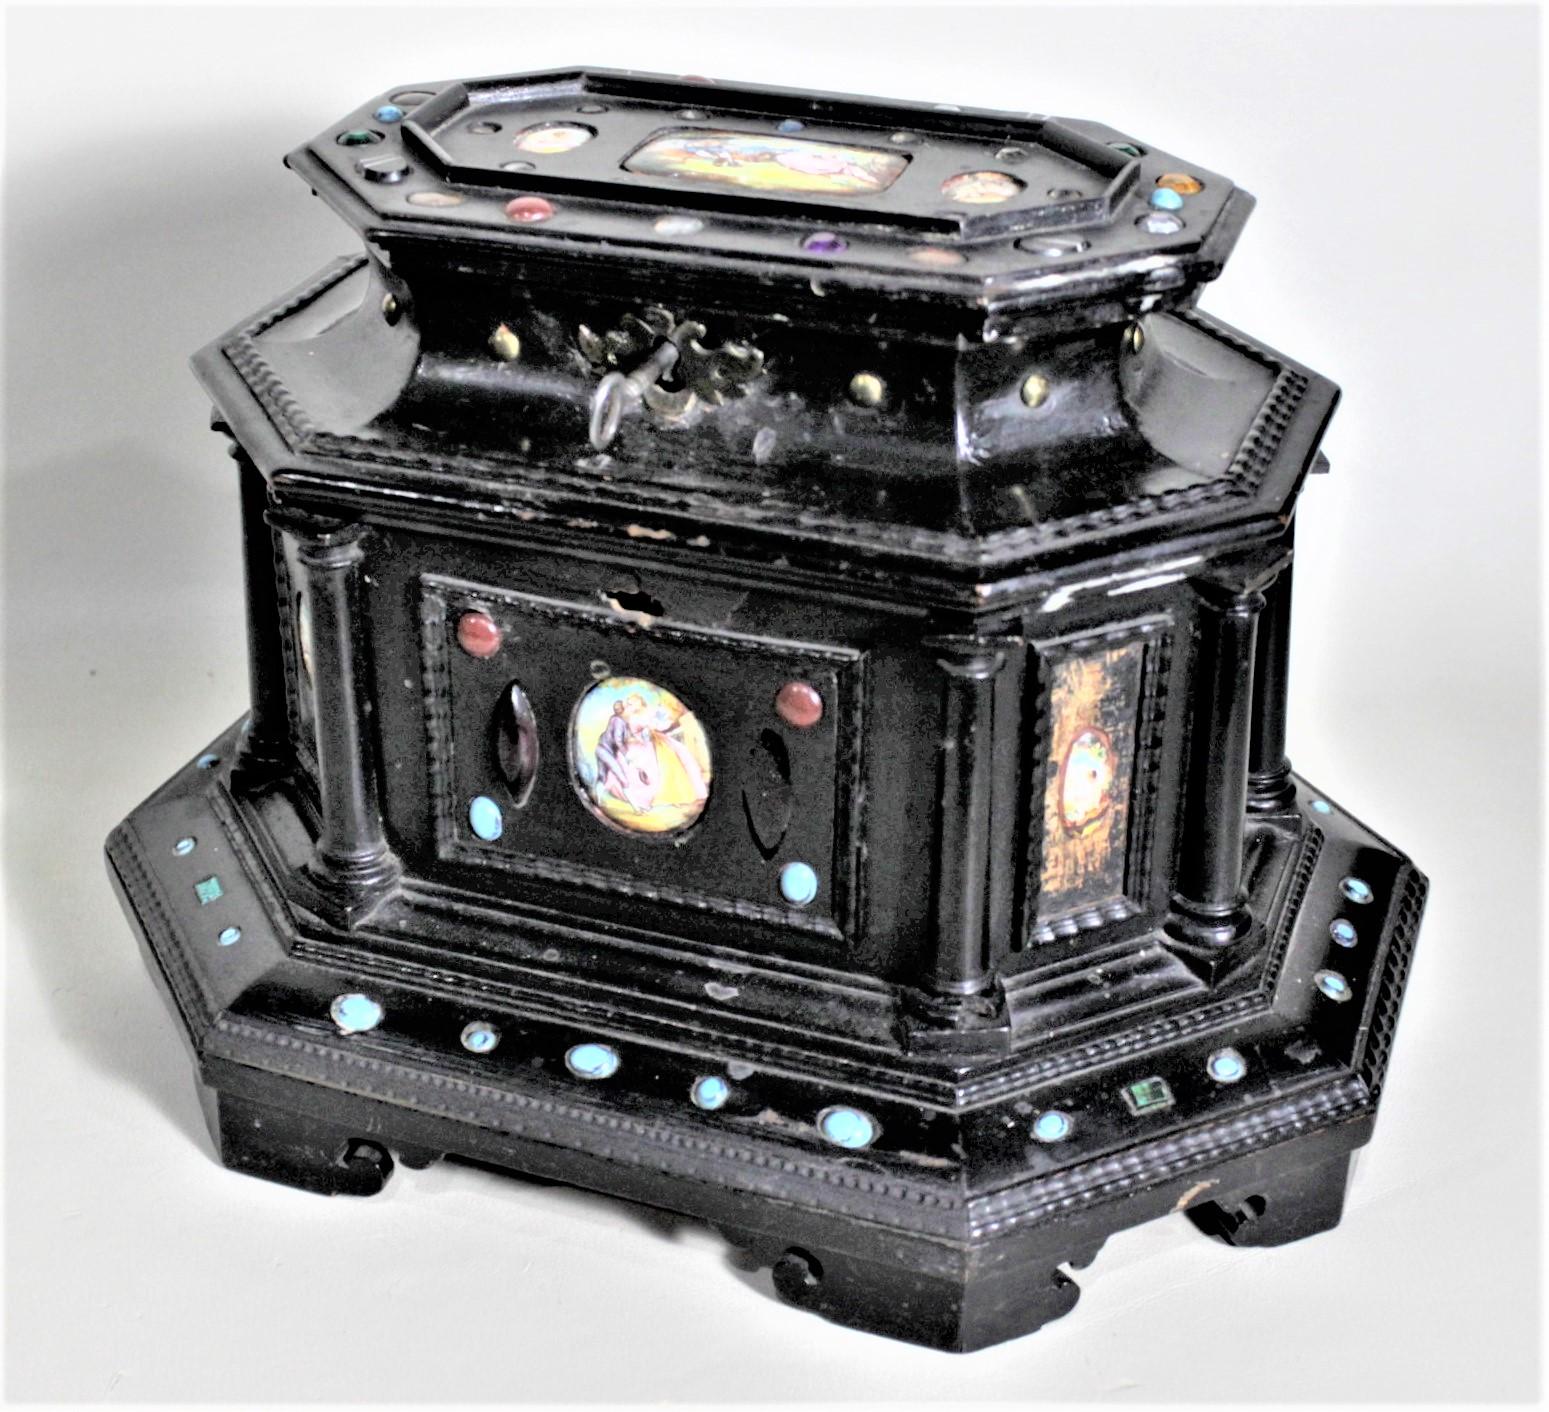 Gothic Revival Antique Two Tiered Jewelry Casket or Box with Inaid Stones & Porcelain Panels For Sale